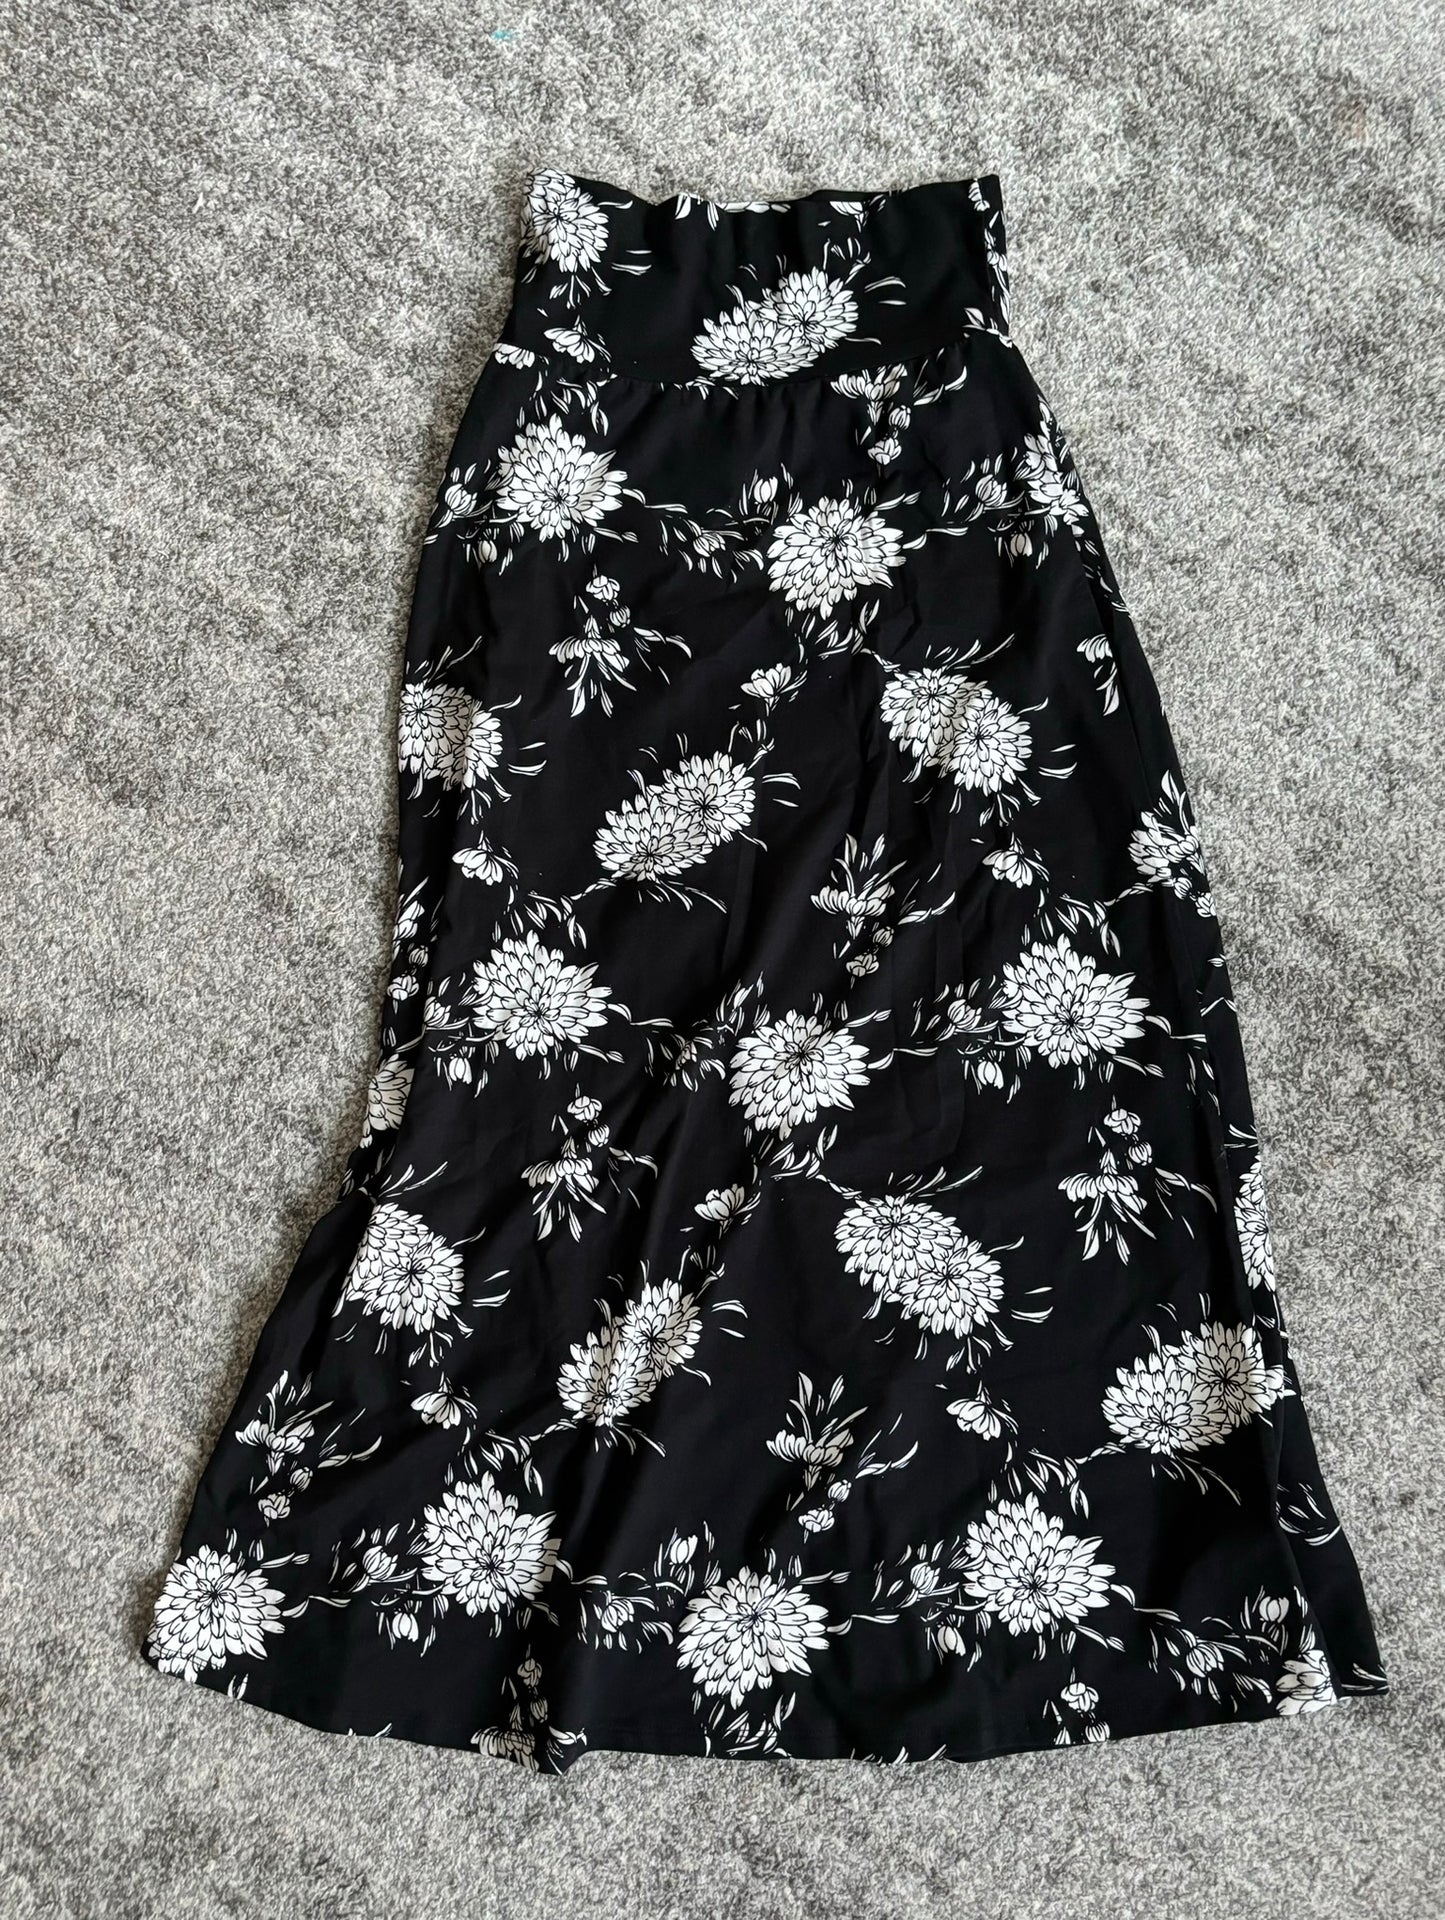 Woman's Extra Small Petite Loveappella Cameron Brushed Knit Floral Maxi Skirt Black White